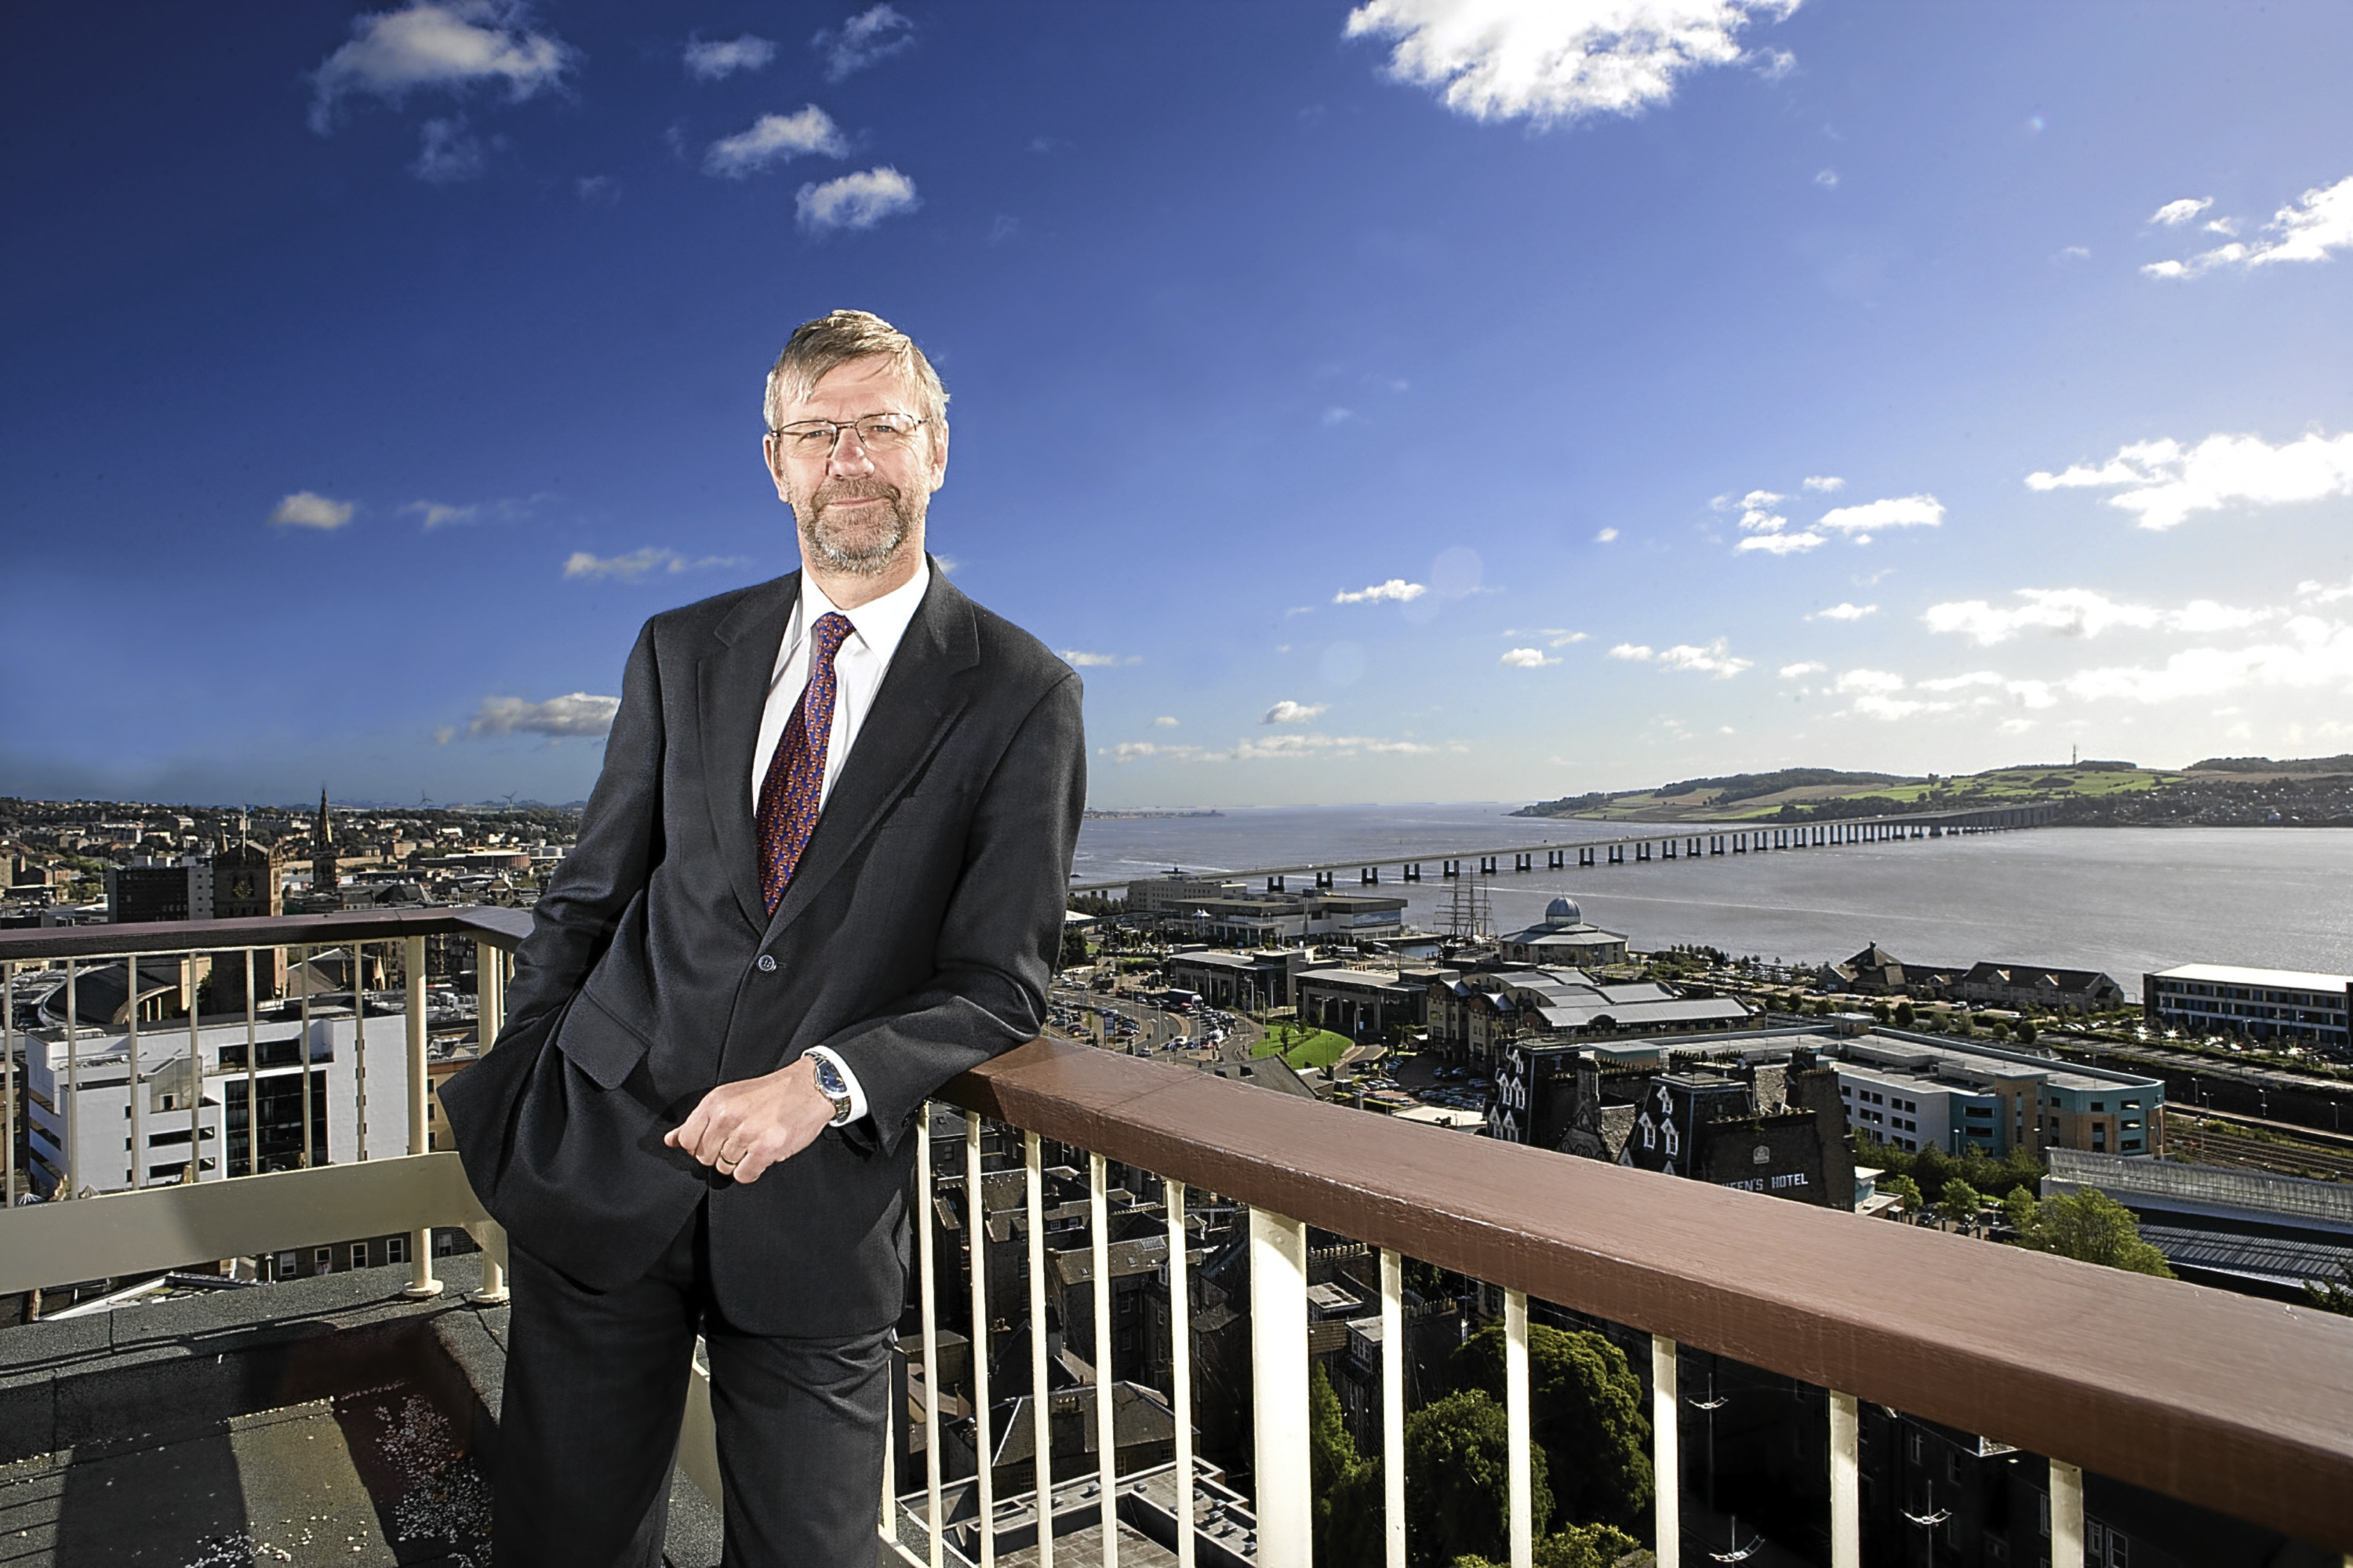 Professor Sir Pete Downes, Principal and Vice-Chancellor of Dundee University